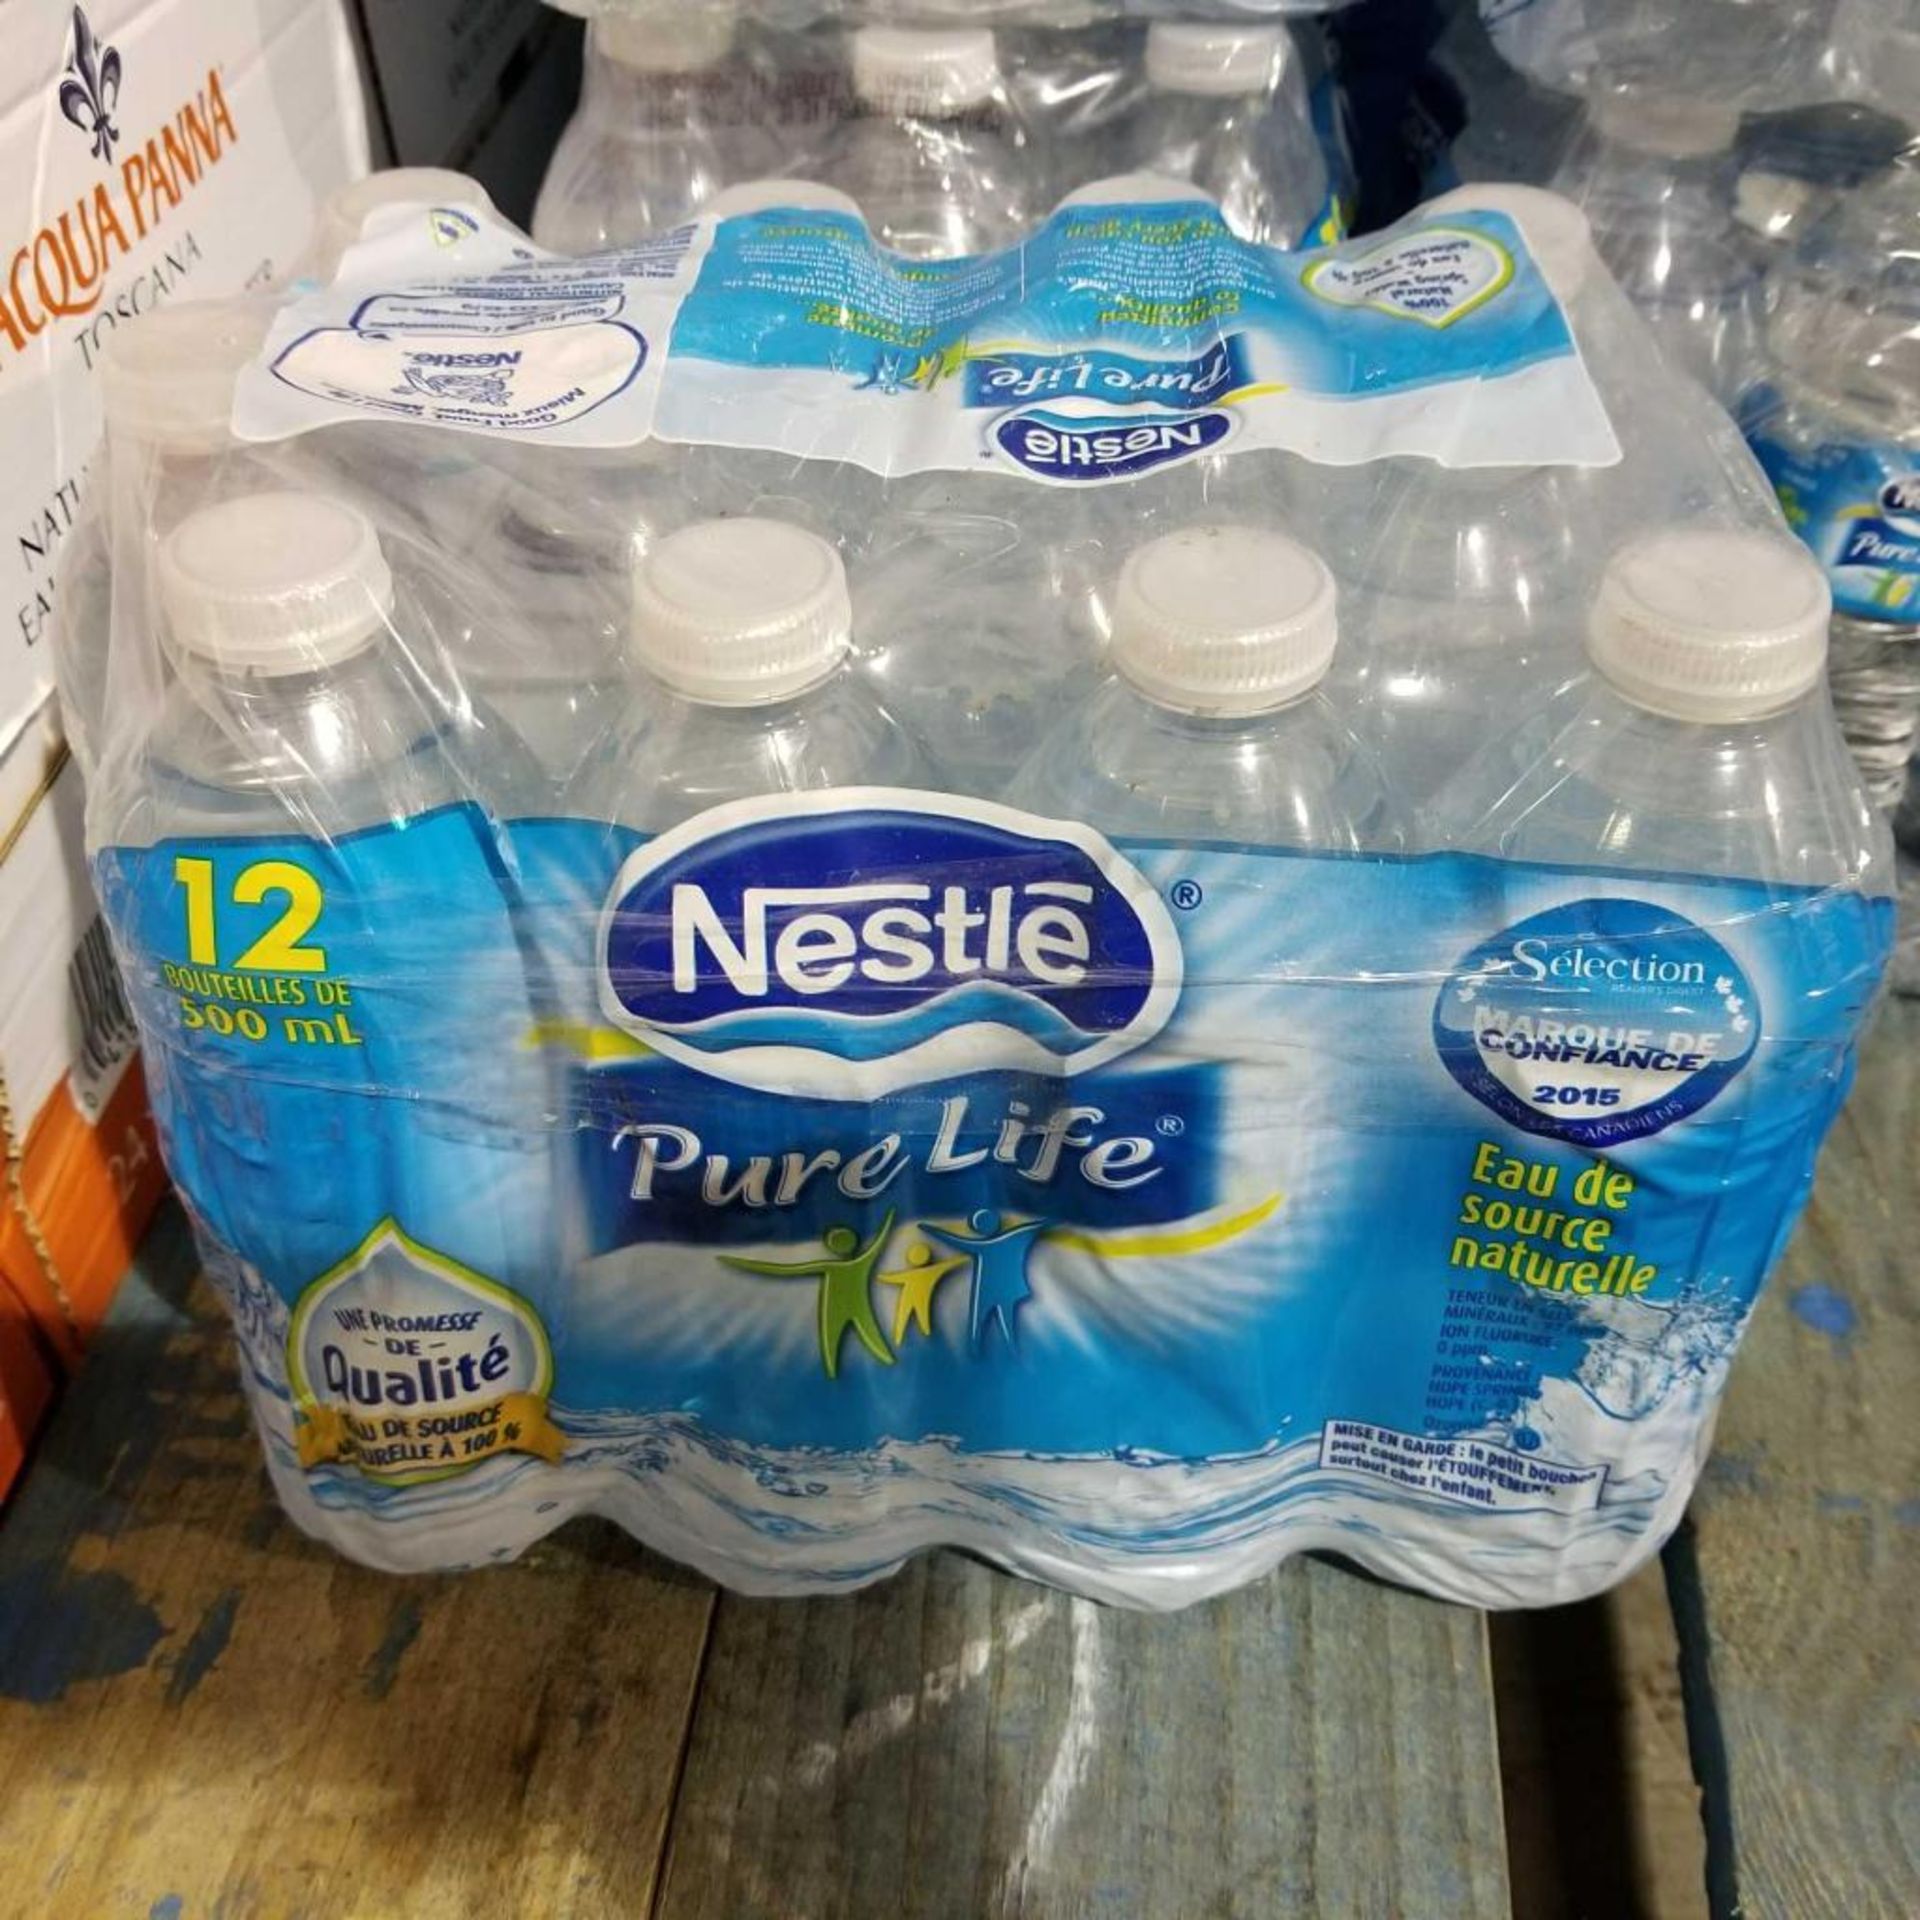 Case of 12 x 500 mL Nestle Pure life Water